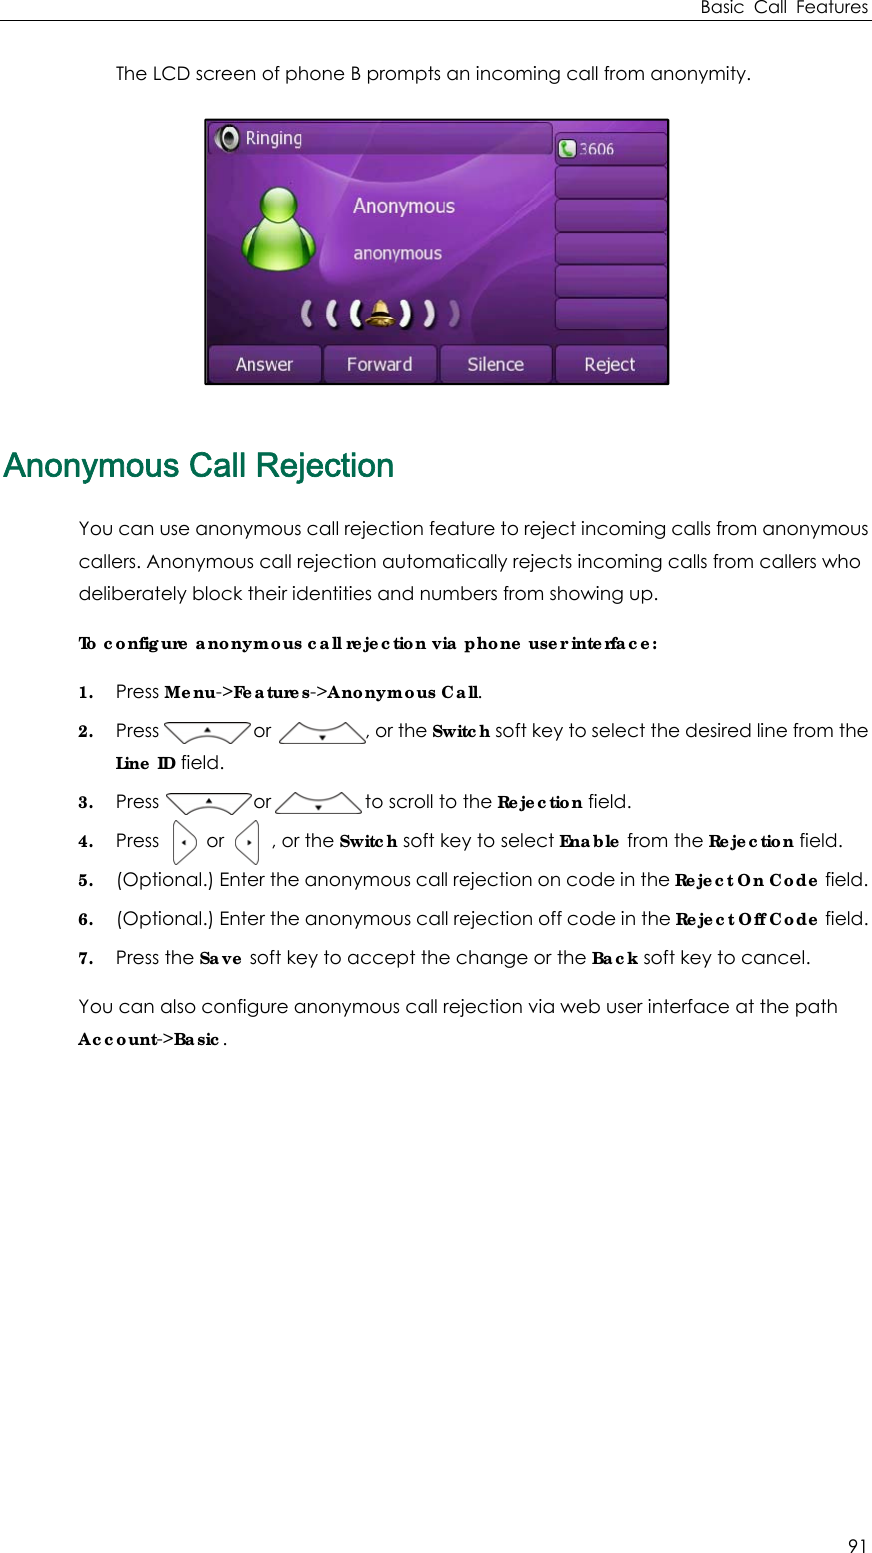 Basic Call Features 91 The LCD screen of phone B prompts an incoming call from anonymity.  Anonymous Call Rejection You can use anonymous call rejection feature to reject incoming calls from anonymous callers. Anonymous call rejection automatically rejects incoming calls from callers who deliberately block their identities and numbers from showing up. To configure anonymous call rejection via phone user interface: 1. Press Menu-&gt;Features-&gt;Anonymous Call. 2. Press          or          , or the Switch soft key to select the desired line from the Line ID field. 3. Press          or          to scroll to the Rejection field. 4. Press     or     , or the Switch soft key to select Enable from the Rejection field. 5. (Optional.) Enter the anonymous call rejection on code in the Reject On Code field. 6. (Optional.) Enter the anonymous call rejection off code in the Reject Off Code field. 7. Press the Save soft key to accept the change or the Back soft key to cancel. You can also configure anonymous call rejection via web user interface at the path Account-&gt;Basic.   